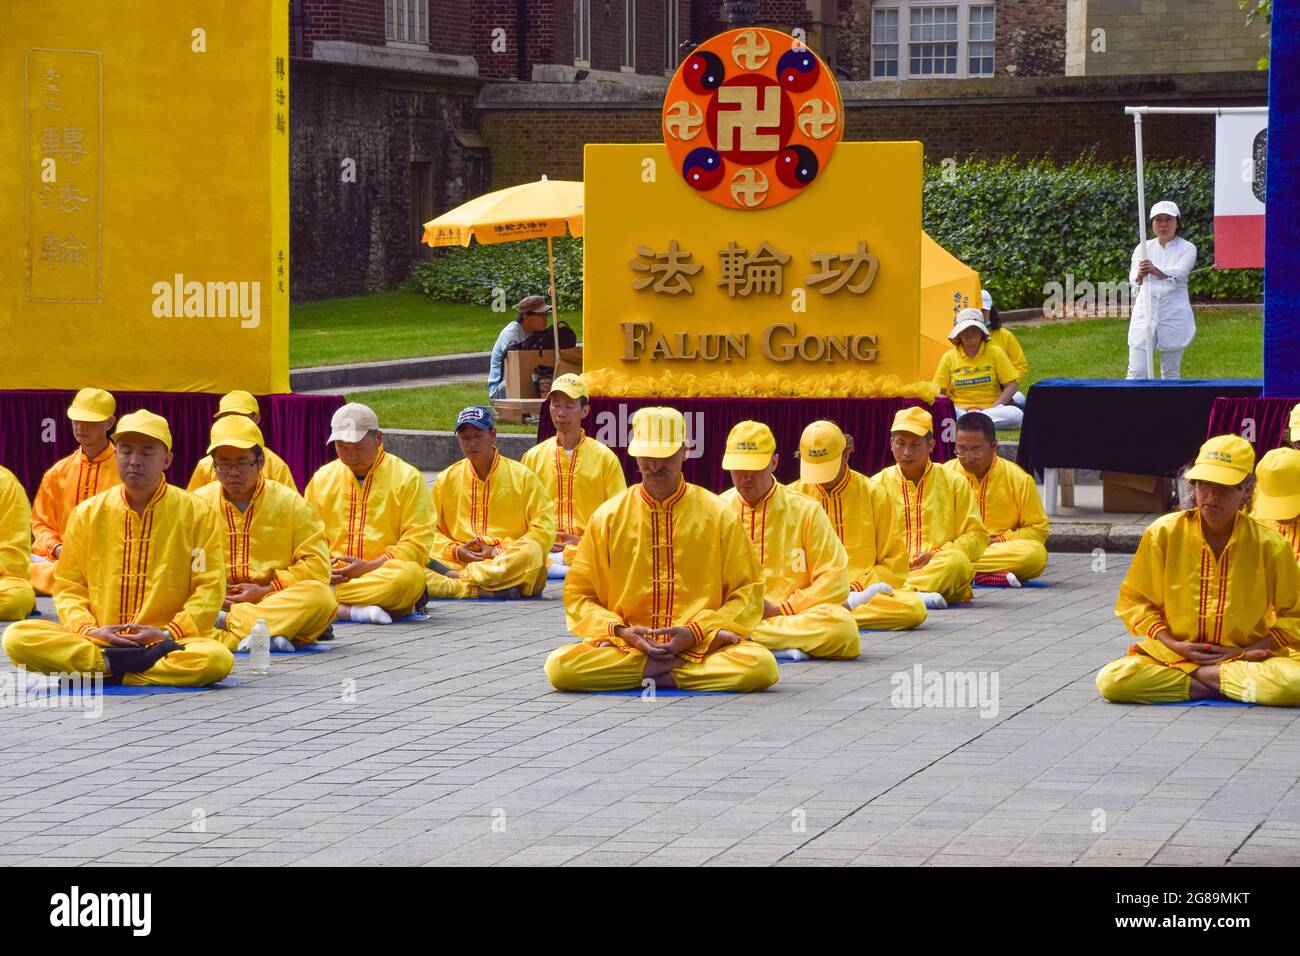 London, United Kingdom. 18th July 2021. Falun Gong practitioners and supporters gathered outside the Houses of Parliament to protest against the Chinese government's persecution, according to the protesters, of Falun Gong (also known as Falun Dafa) meditation practitioners, through abductions, imprisonment, torture, and organ harvesting. (Credit: Vuk Valcic / Alamy Live News) Stock Photo